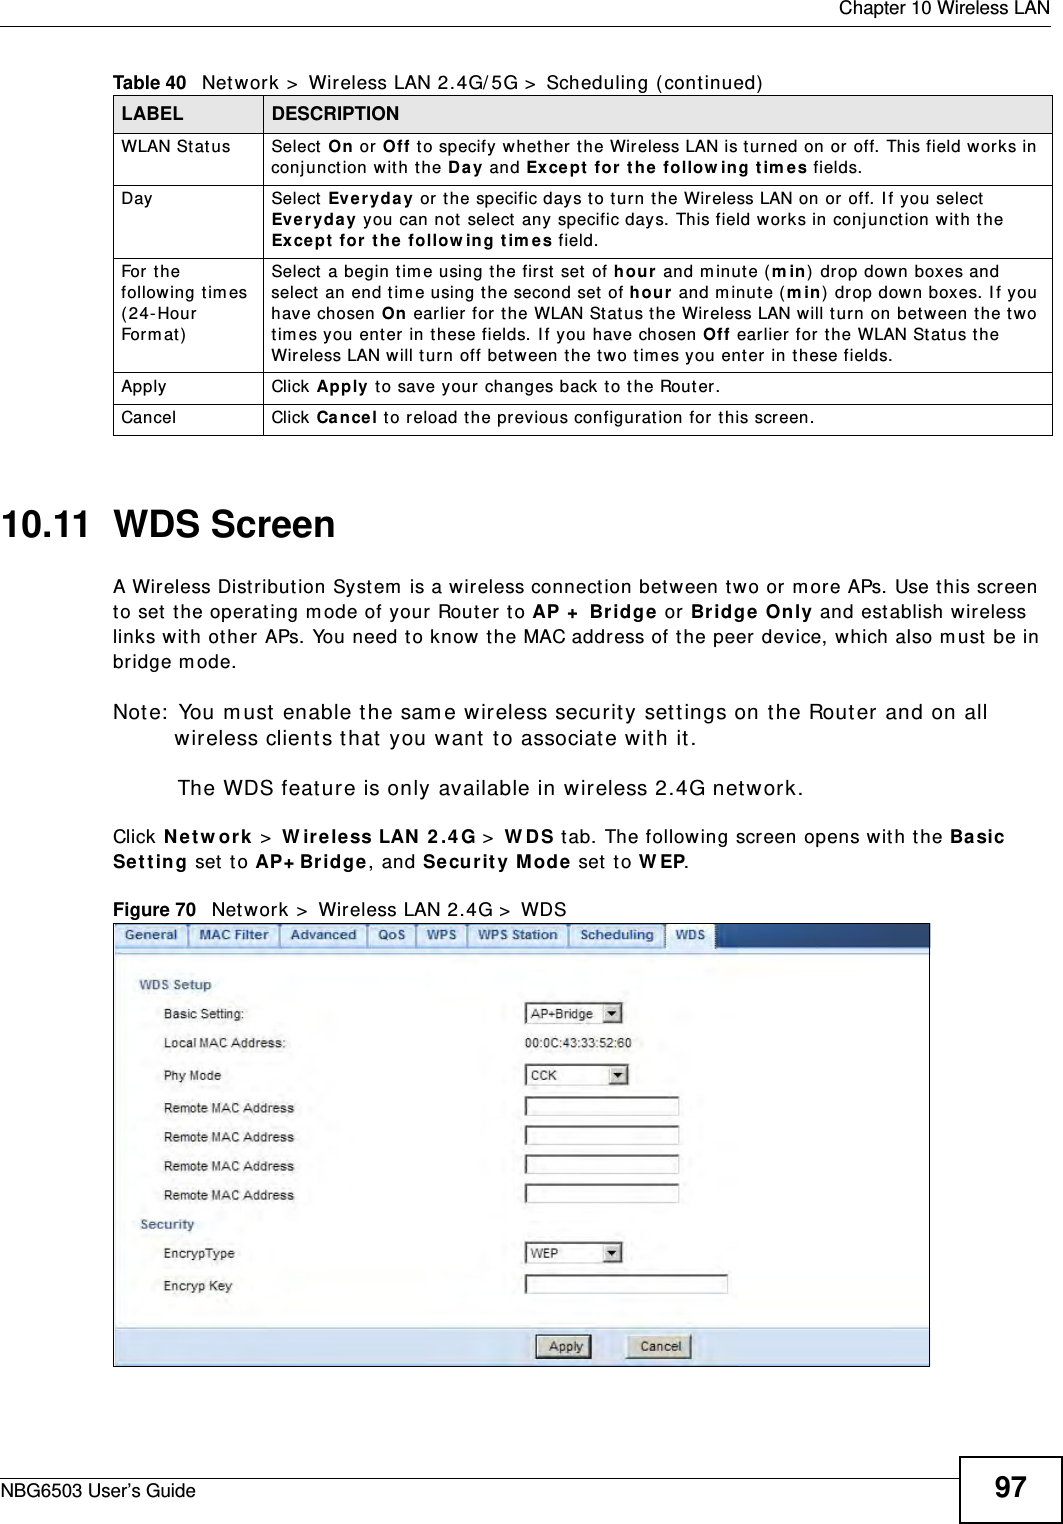  Chapter 10 Wireless LANNBG6503 User’s Guide 9710.11  WDS ScreenA Wireless Distribution System is a wireless connection between two or more APs. Use this screen to set the operating mode of your Router to AP + Bridge or Bridge Only and establish wireless links with other APs. You need to know the MAC address of the peer device, which also must be in bridge mode. Note: You must enable the same wireless security settings on the Router and on all wireless clients that you want to associate with it.The WDS feature is only available in wireless 2.4G network.Click Network &gt; Wireless LAN 2.4G &gt; WDS tab. The following screen opens with the Basic Setting set to AP+Bridge, and Security Mode set to WEP.Figure 70   Network &gt; Wireless LAN 2.4G &gt; WDSWLAN Status Select On or Off to specify whether the Wireless LAN is turned on or off. This field works in conjunction with the Day and Except for the following times fields.Day Select Everyday or the specific days to turn the Wireless LAN on or off. If you select Everyday you can not select any specific days. This field works in conjunction with the  Except for the following times field.For the following times (24-Hour Format)Select a begin time using the first set of hour and minute (min) drop down boxes and select an end time using the second set of hour and minute (min) drop down boxes. If you have chosen On earlier for the WLAN Status the Wireless LAN will turn on between the two times you enter in these fields. If you have chosen Off earlier for the WLAN Status the Wireless LAN will turn off between the two times you enter in these fields. Apply Click Apply to save your changes back to the Router.Cancel Click Cancel to reload the previous configuration for this screen.Table 40   Network &gt; Wireless LAN 2.4G/5G &gt; Scheduling (continued)LABEL DESCRIPTION